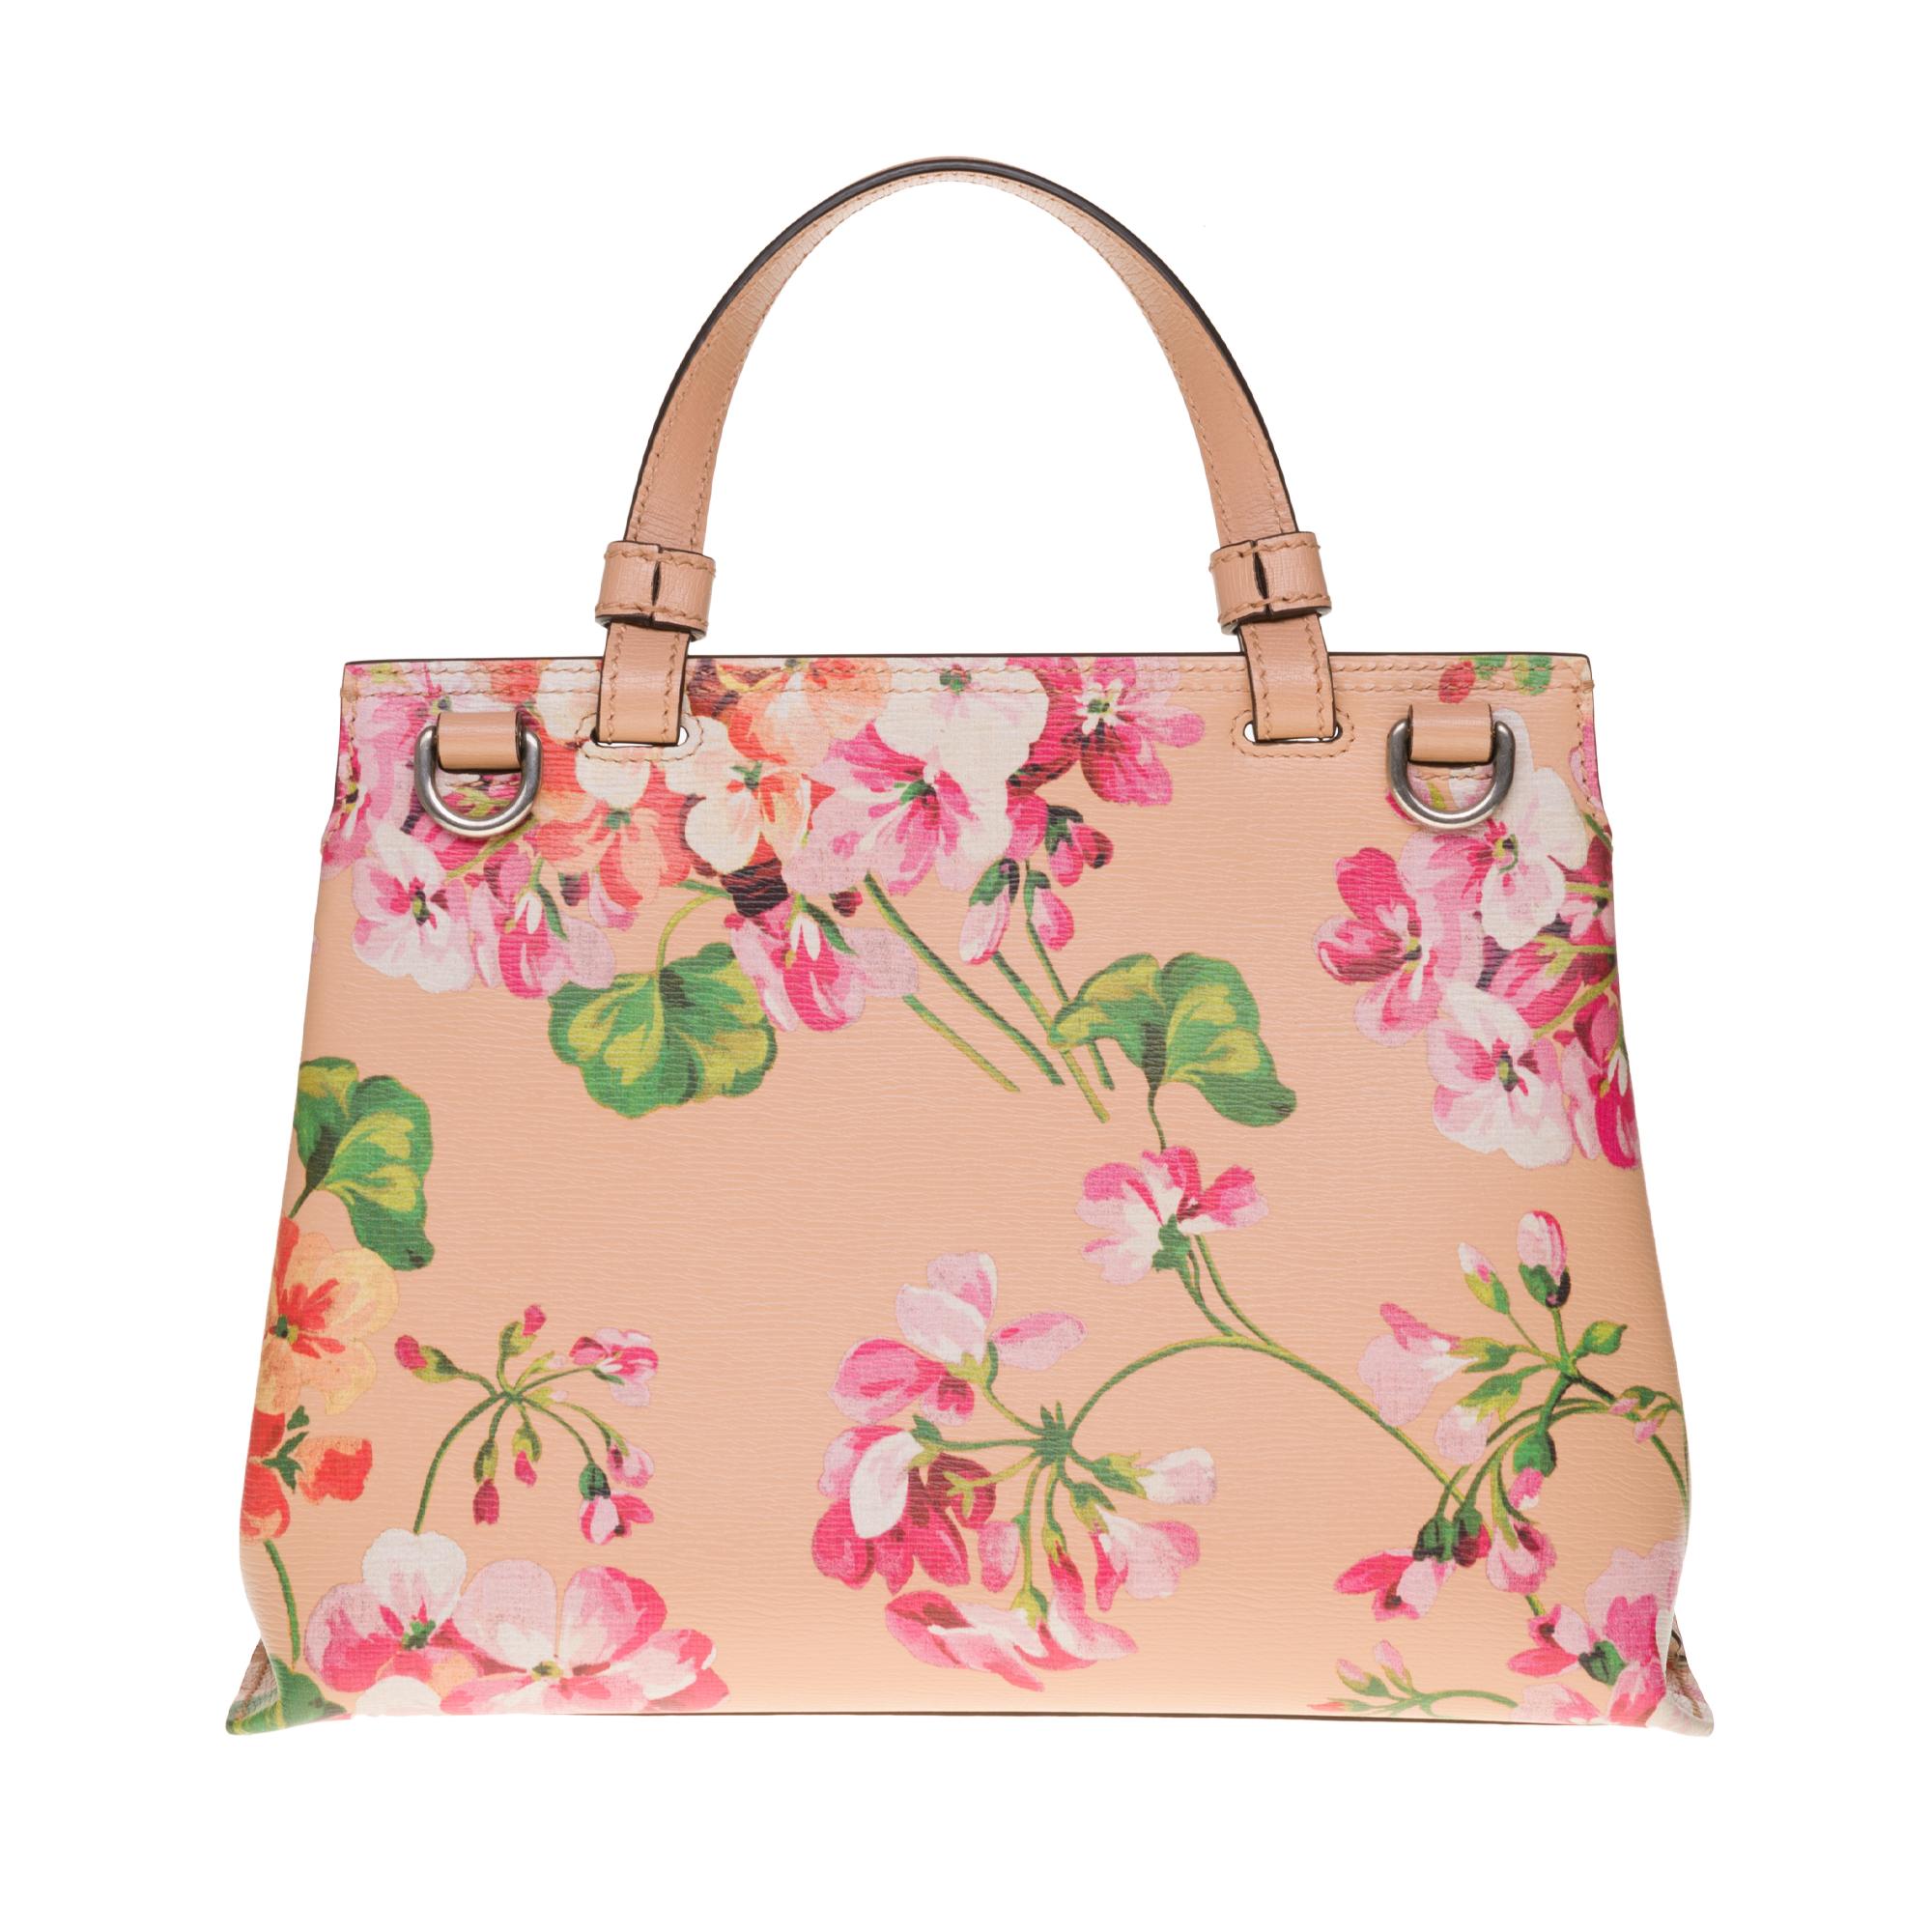 This chic shoulder bag is crafted of beautiful calfskin leather in blush pink with a floral print. The bag features leather top handle, a looping end to end long shoulder strap and a facing flap pocket with a weighted bamboo closure. The flap opens